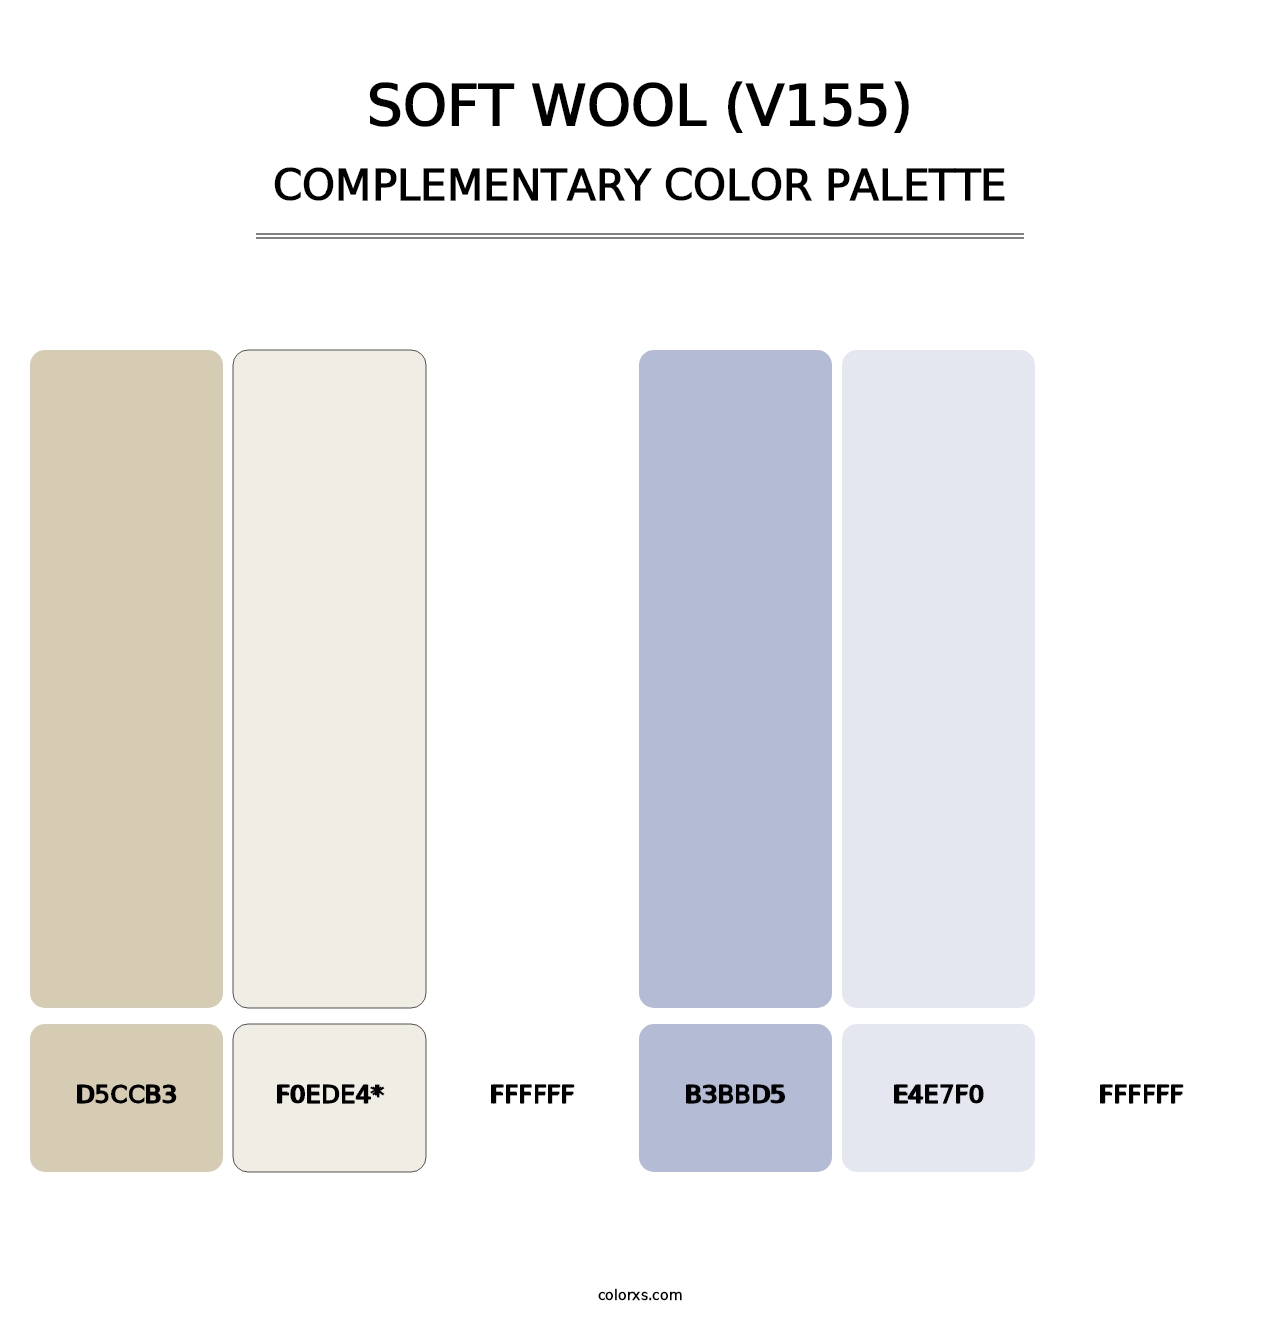 Soft Wool (V155) - Complementary Color Palette